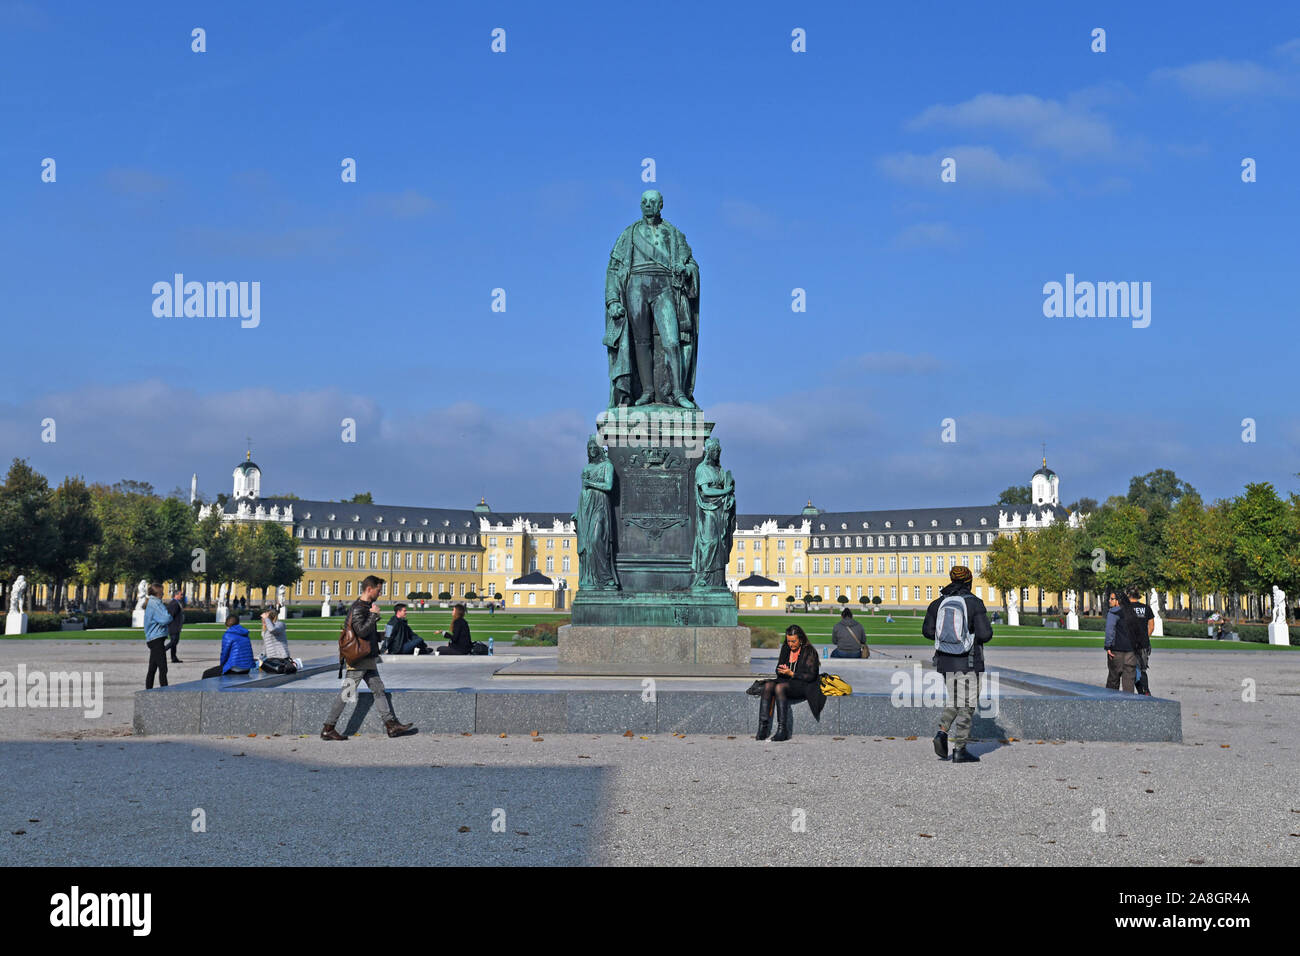 Karlsruhe, Germany, Fountain with monument statue of grand duke of Baden Karl-Friedrich, also calledd Charles Frederick, in front of baroque palace Stock Photo